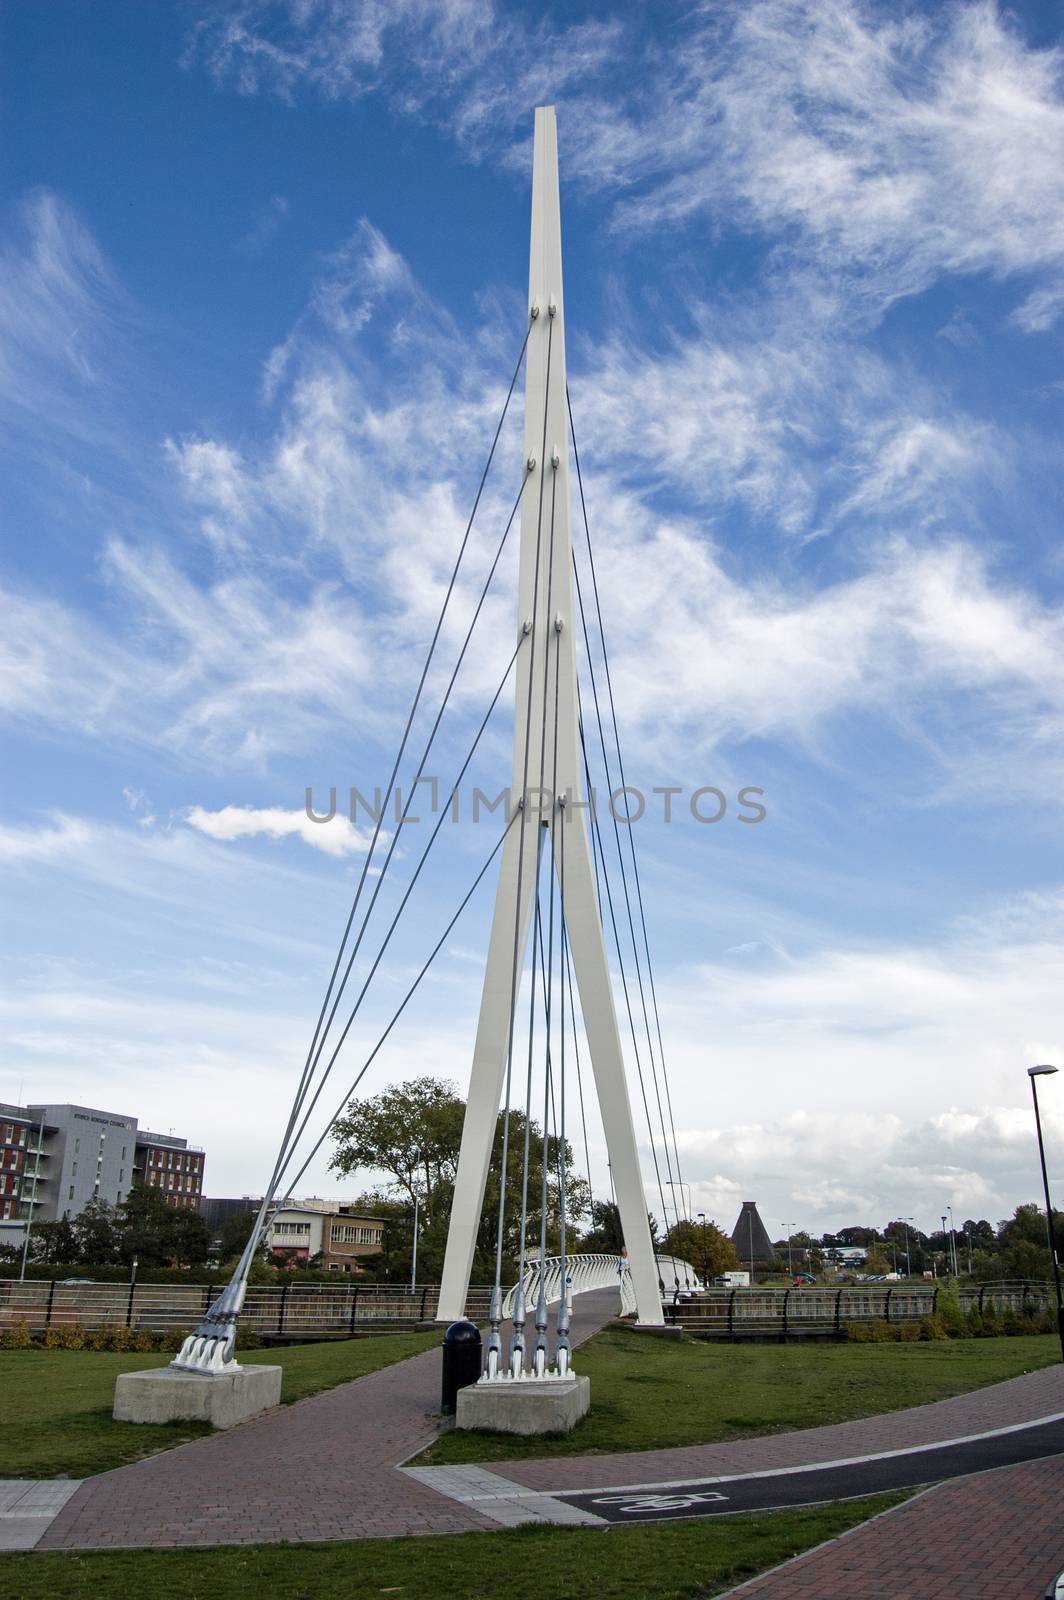 A new footbridge across the River Orwell in Ipswich, Suffolk. Dedicated to the footballer Sir Bobby Robson.